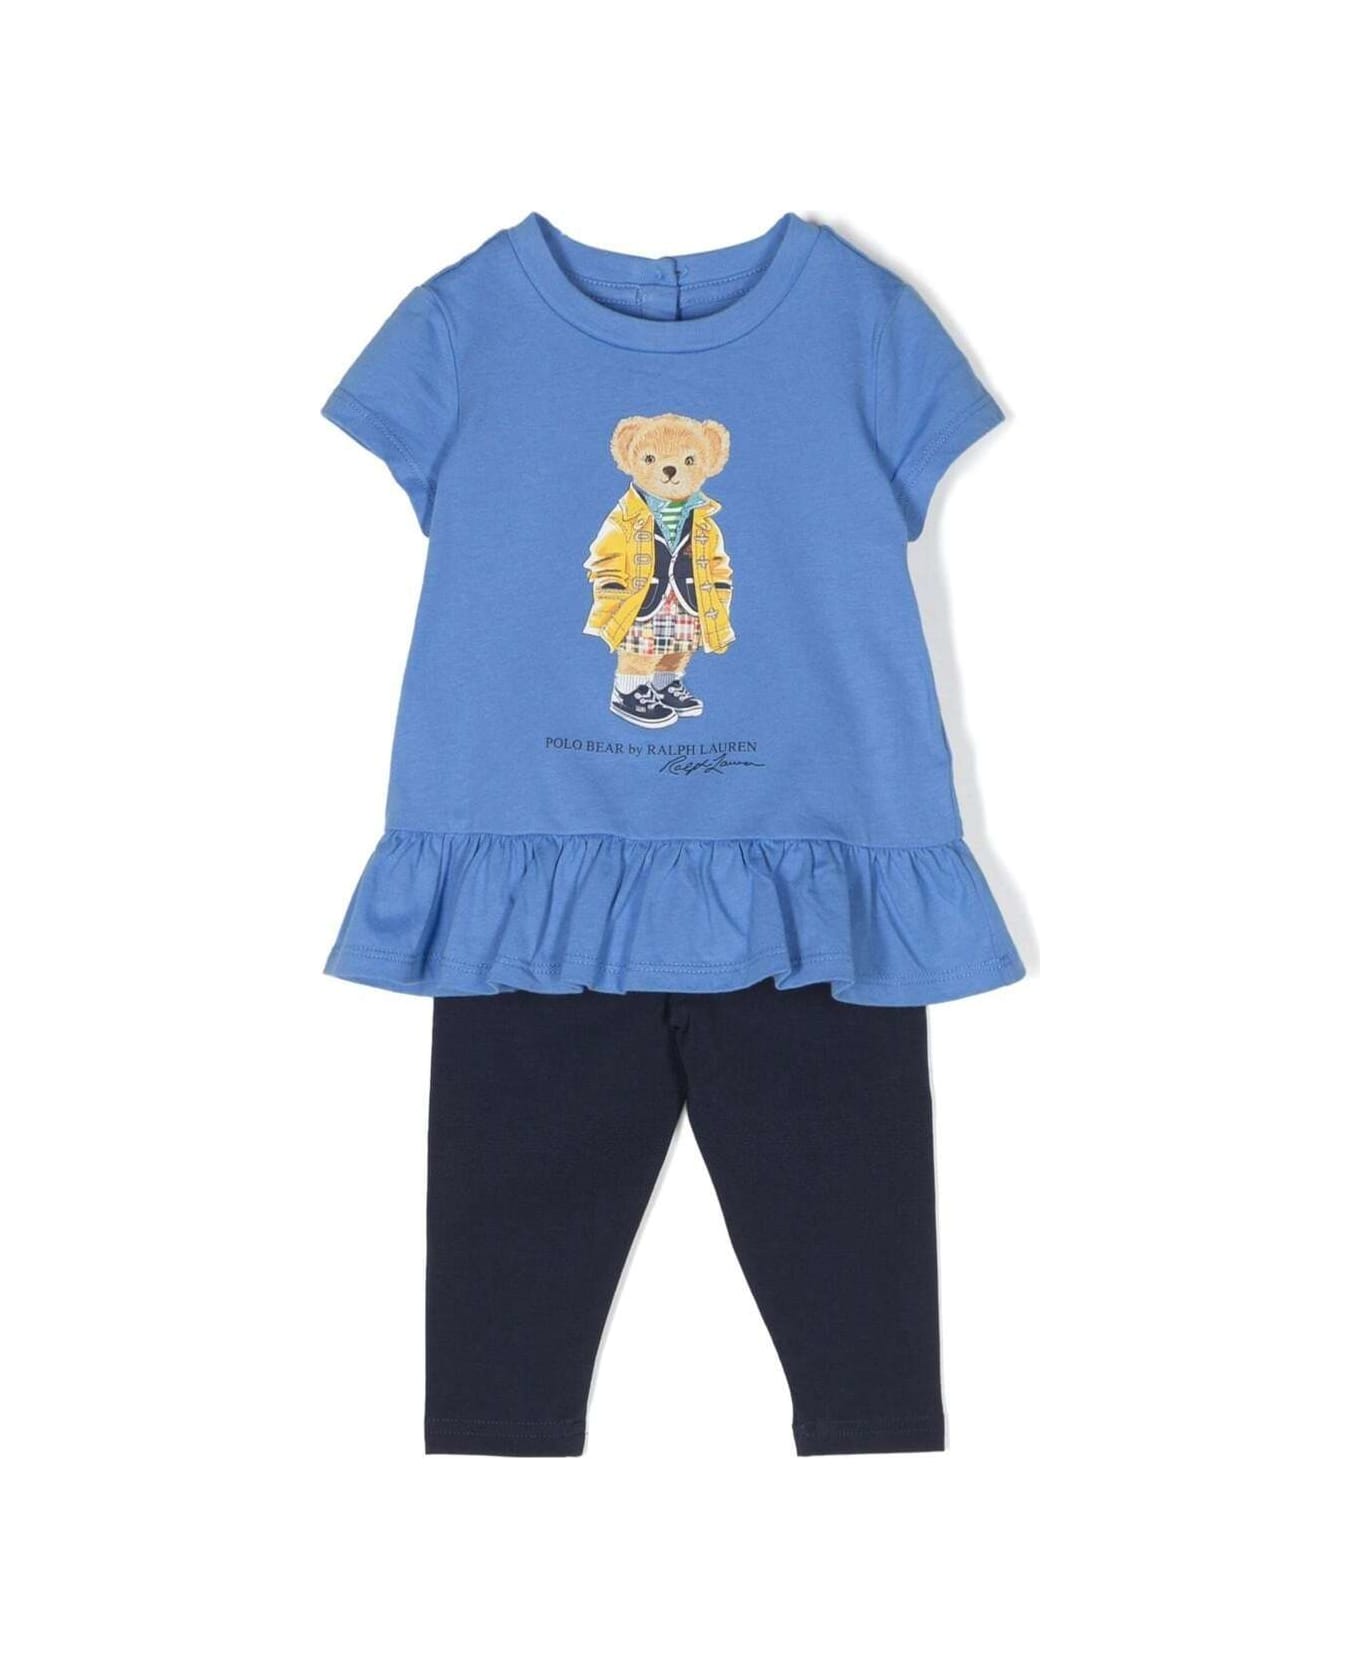 Polo Ralph Lauren Blue And Black Set With Top And Leggings With Teddy Bear Print In Cotton Baby - Blu